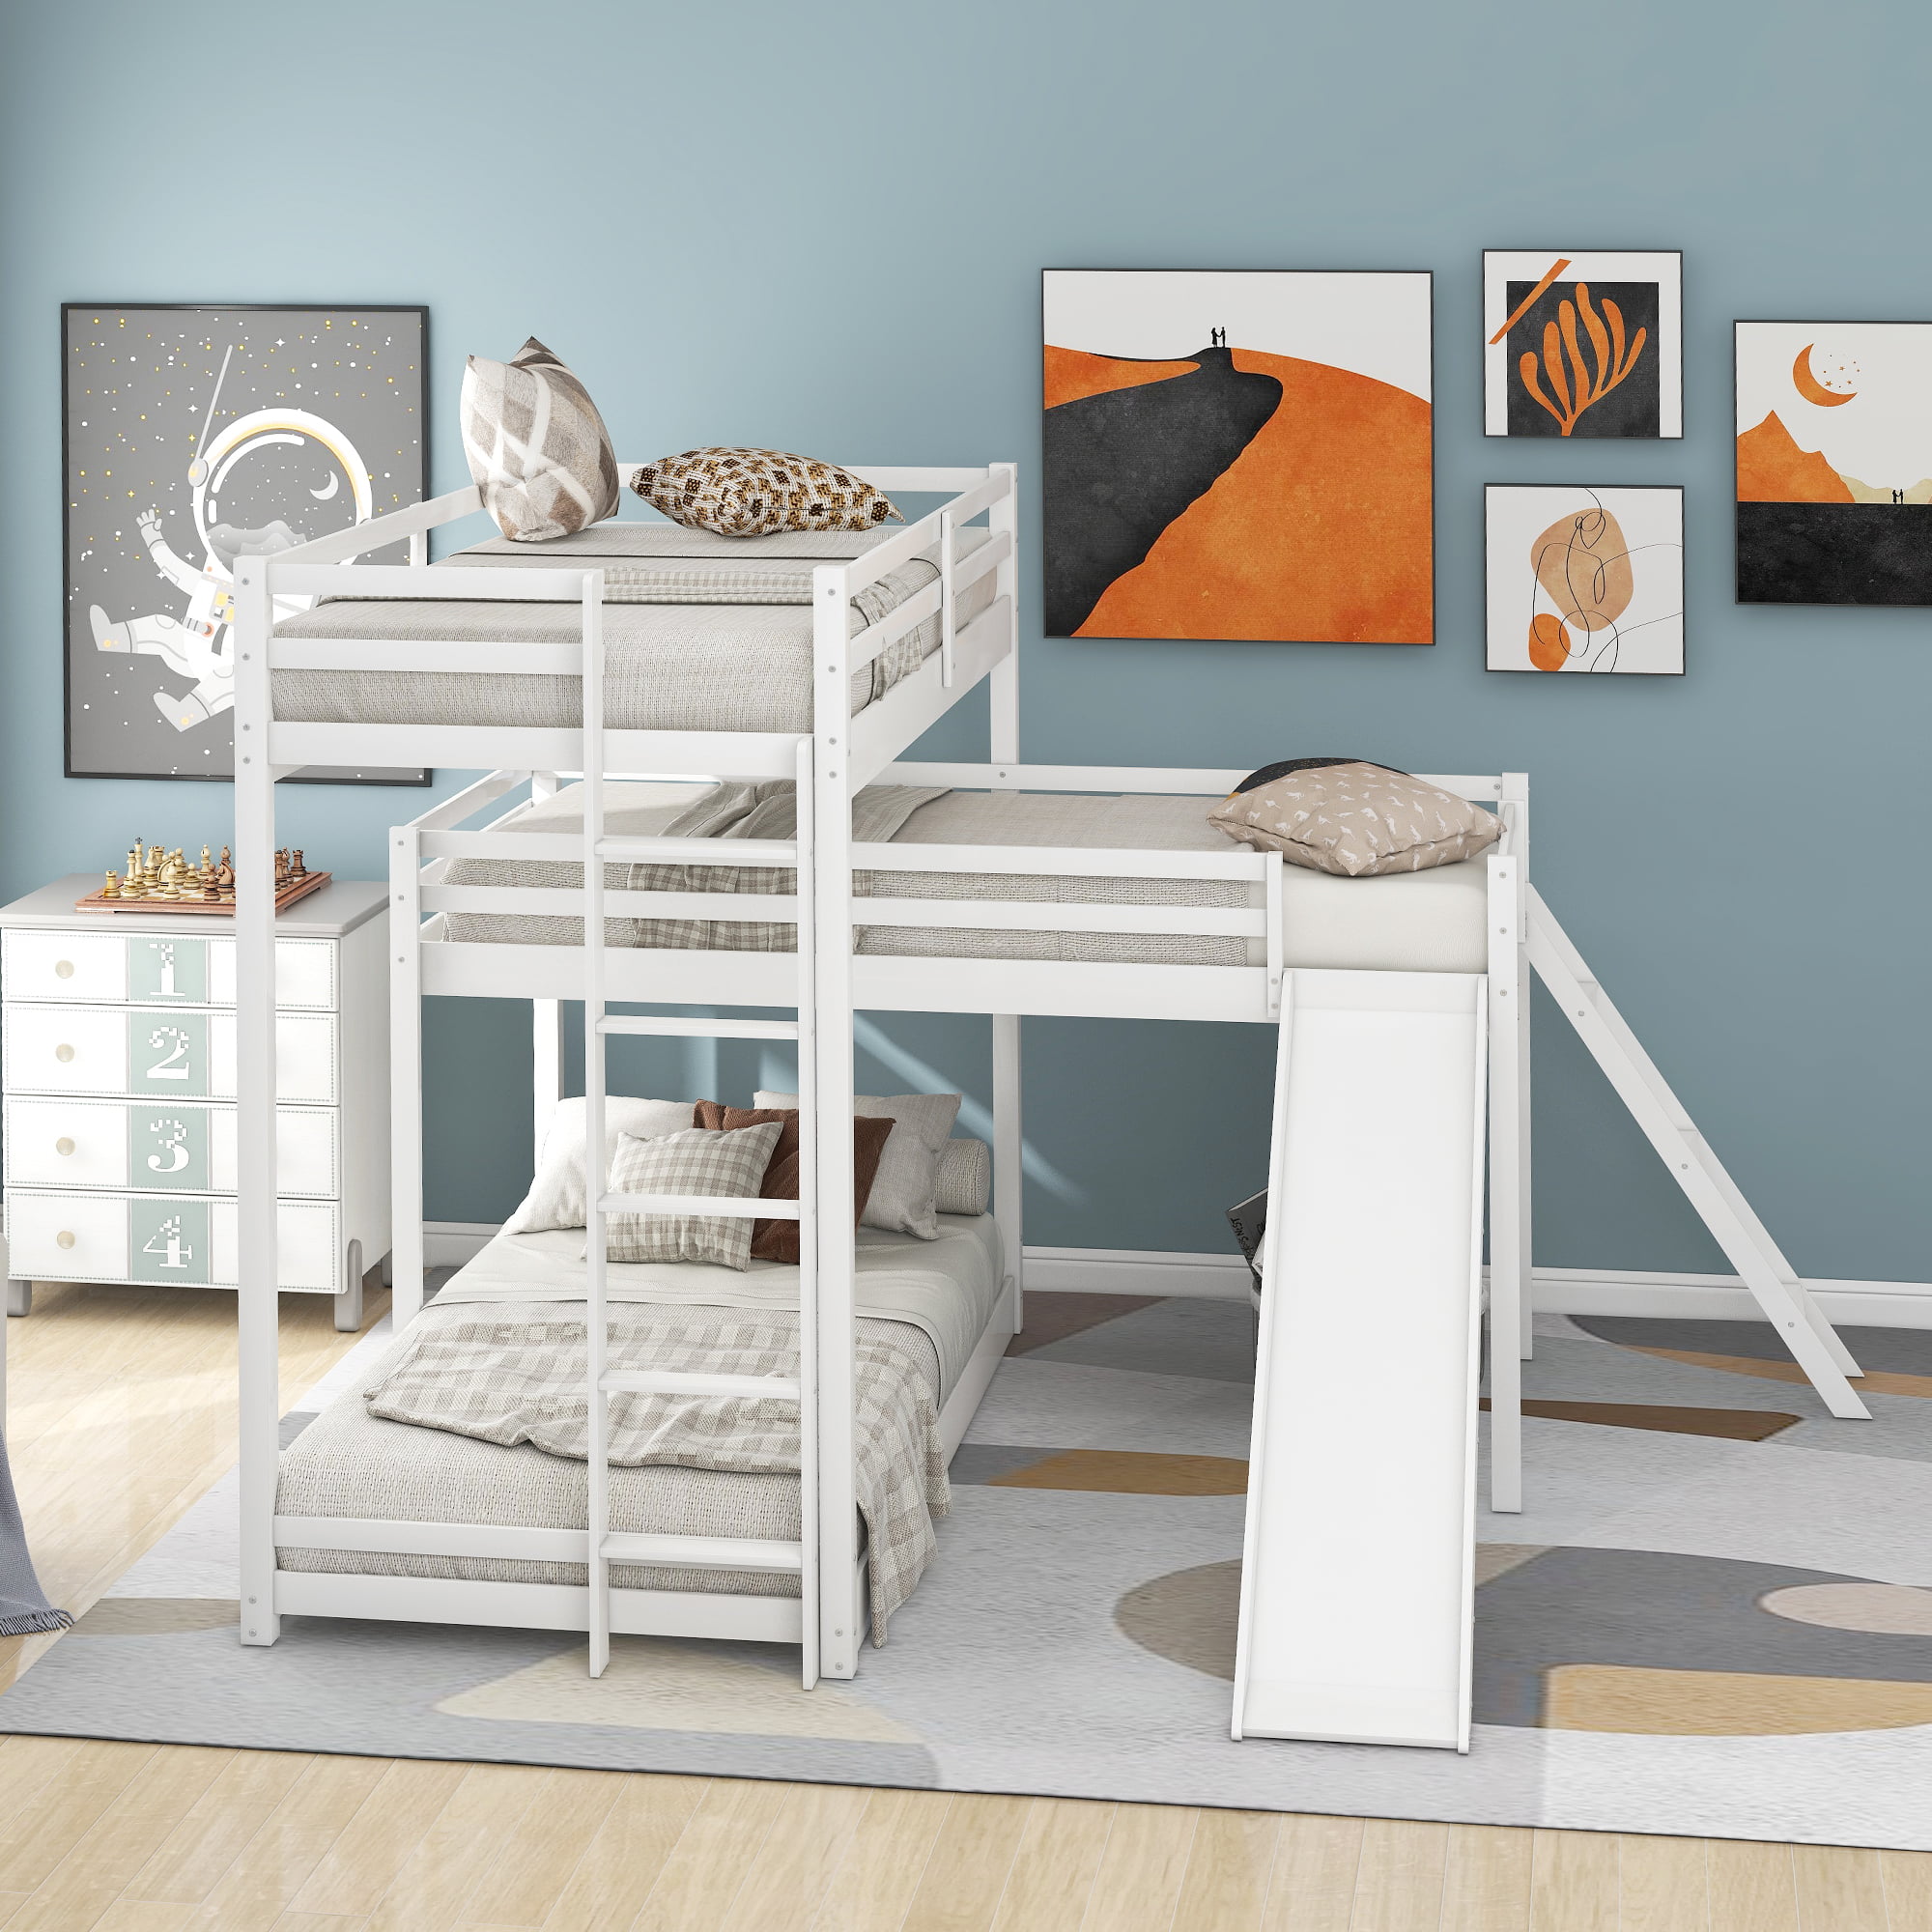 Bunk Beds For 3 L Shaped Triple Bed, Bunk Beds For 3 Kids